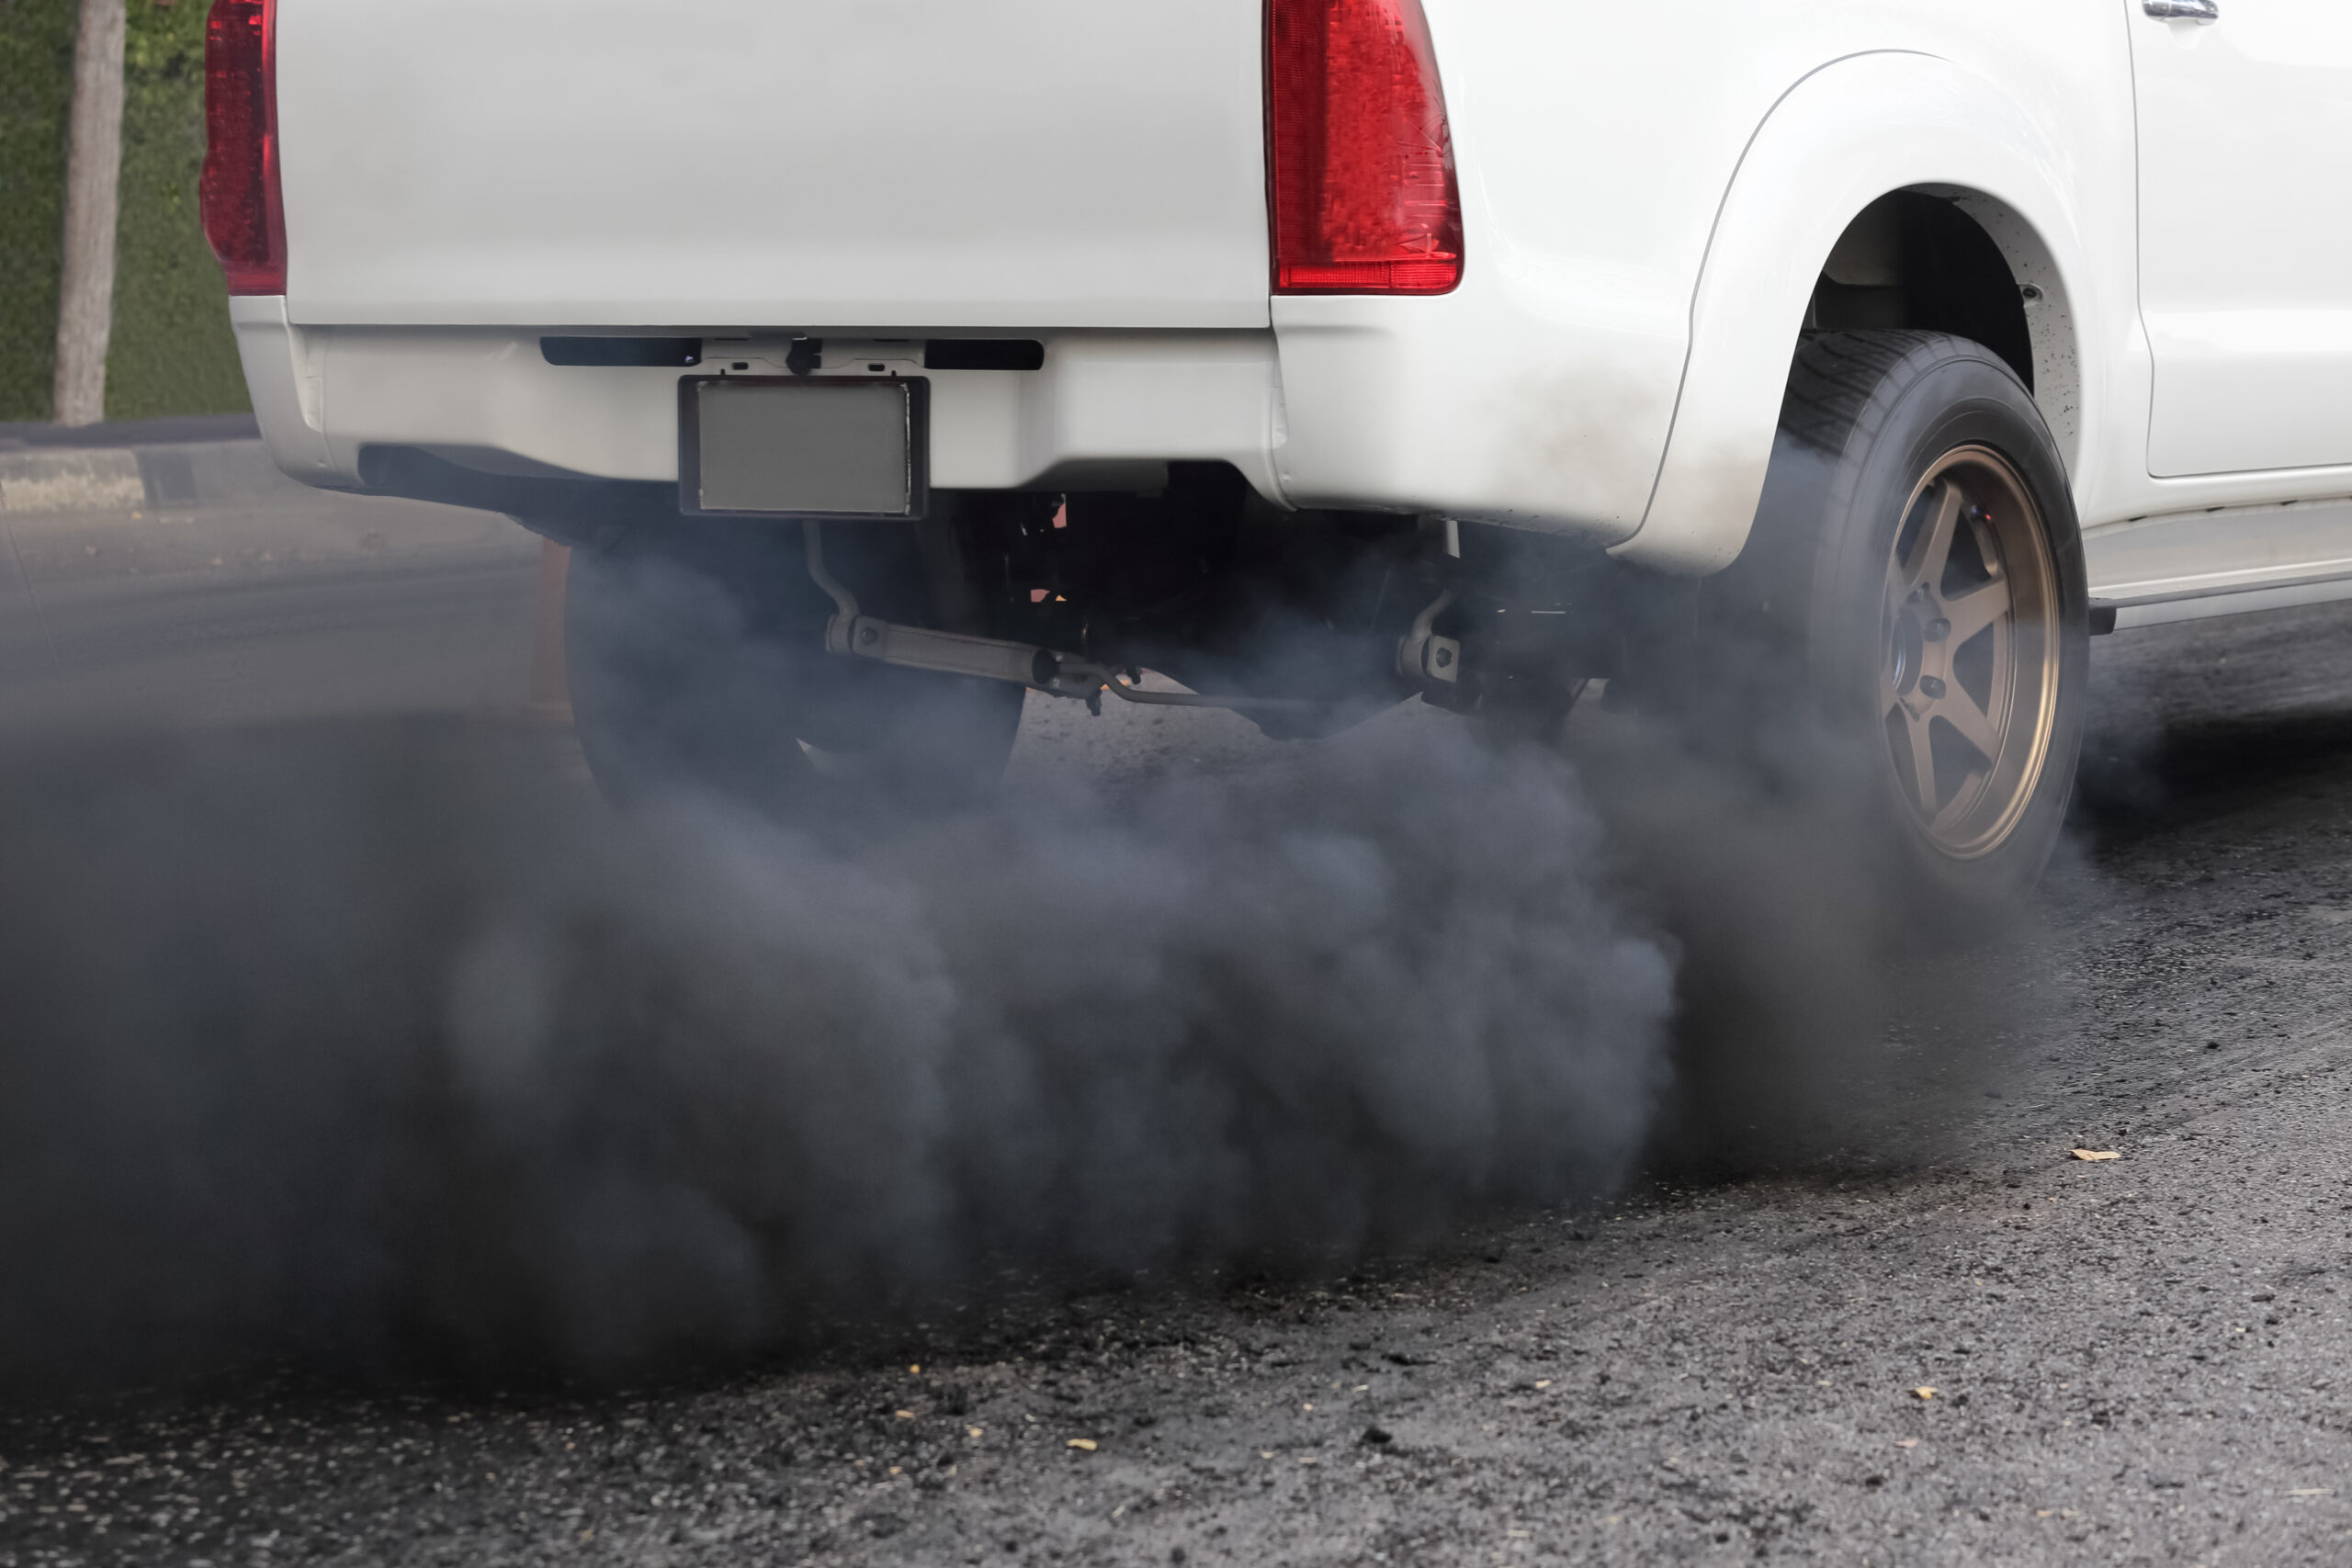 Air pollution from vehicle exhaust pipe